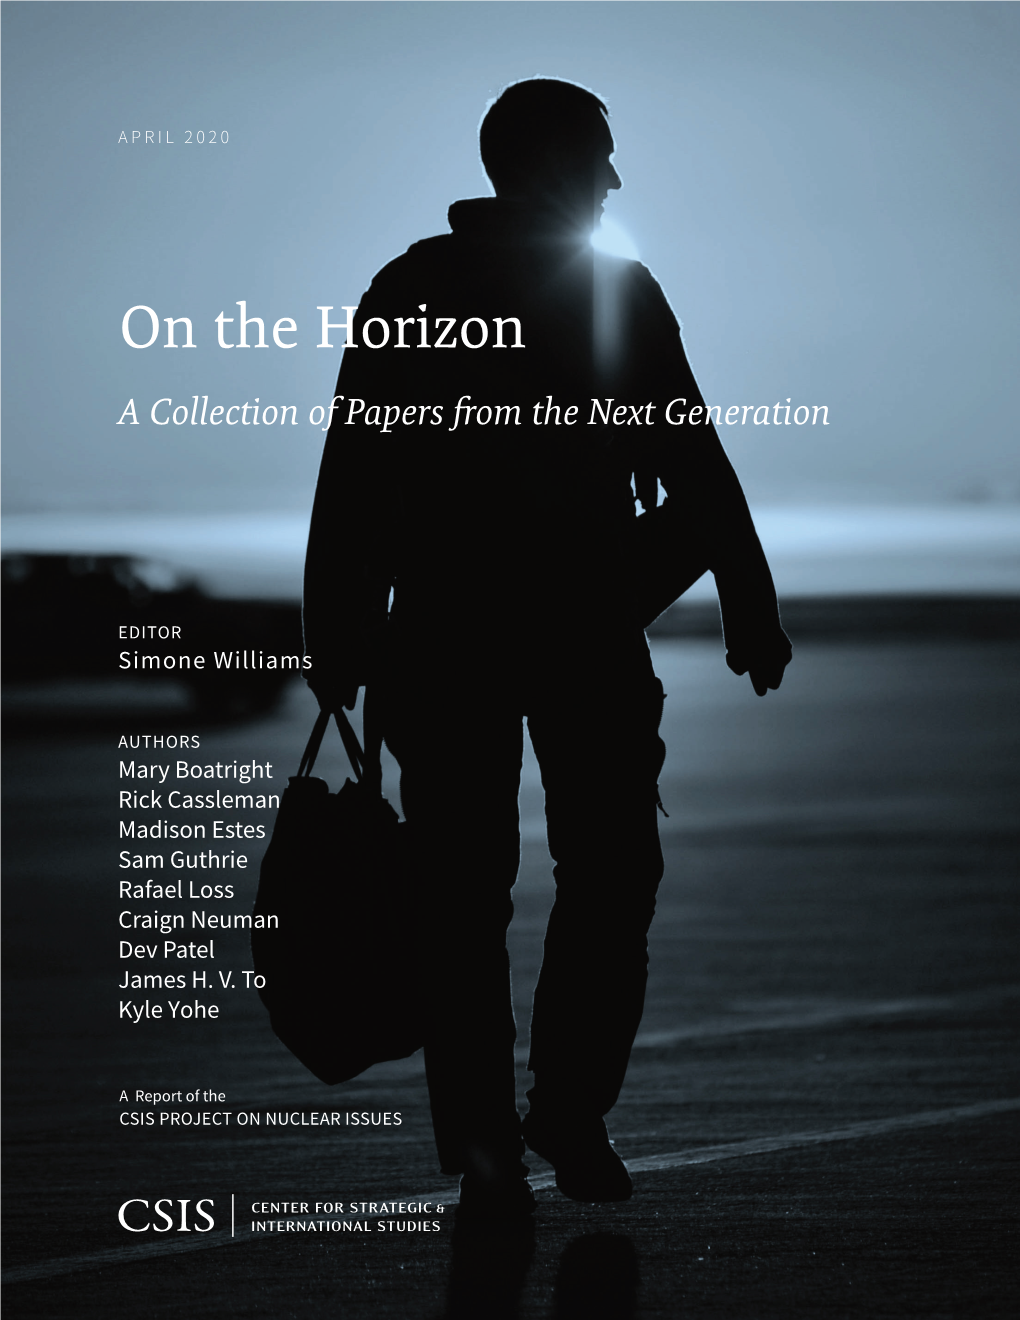 On the Horizon a Collection of Papers from the Next Generation